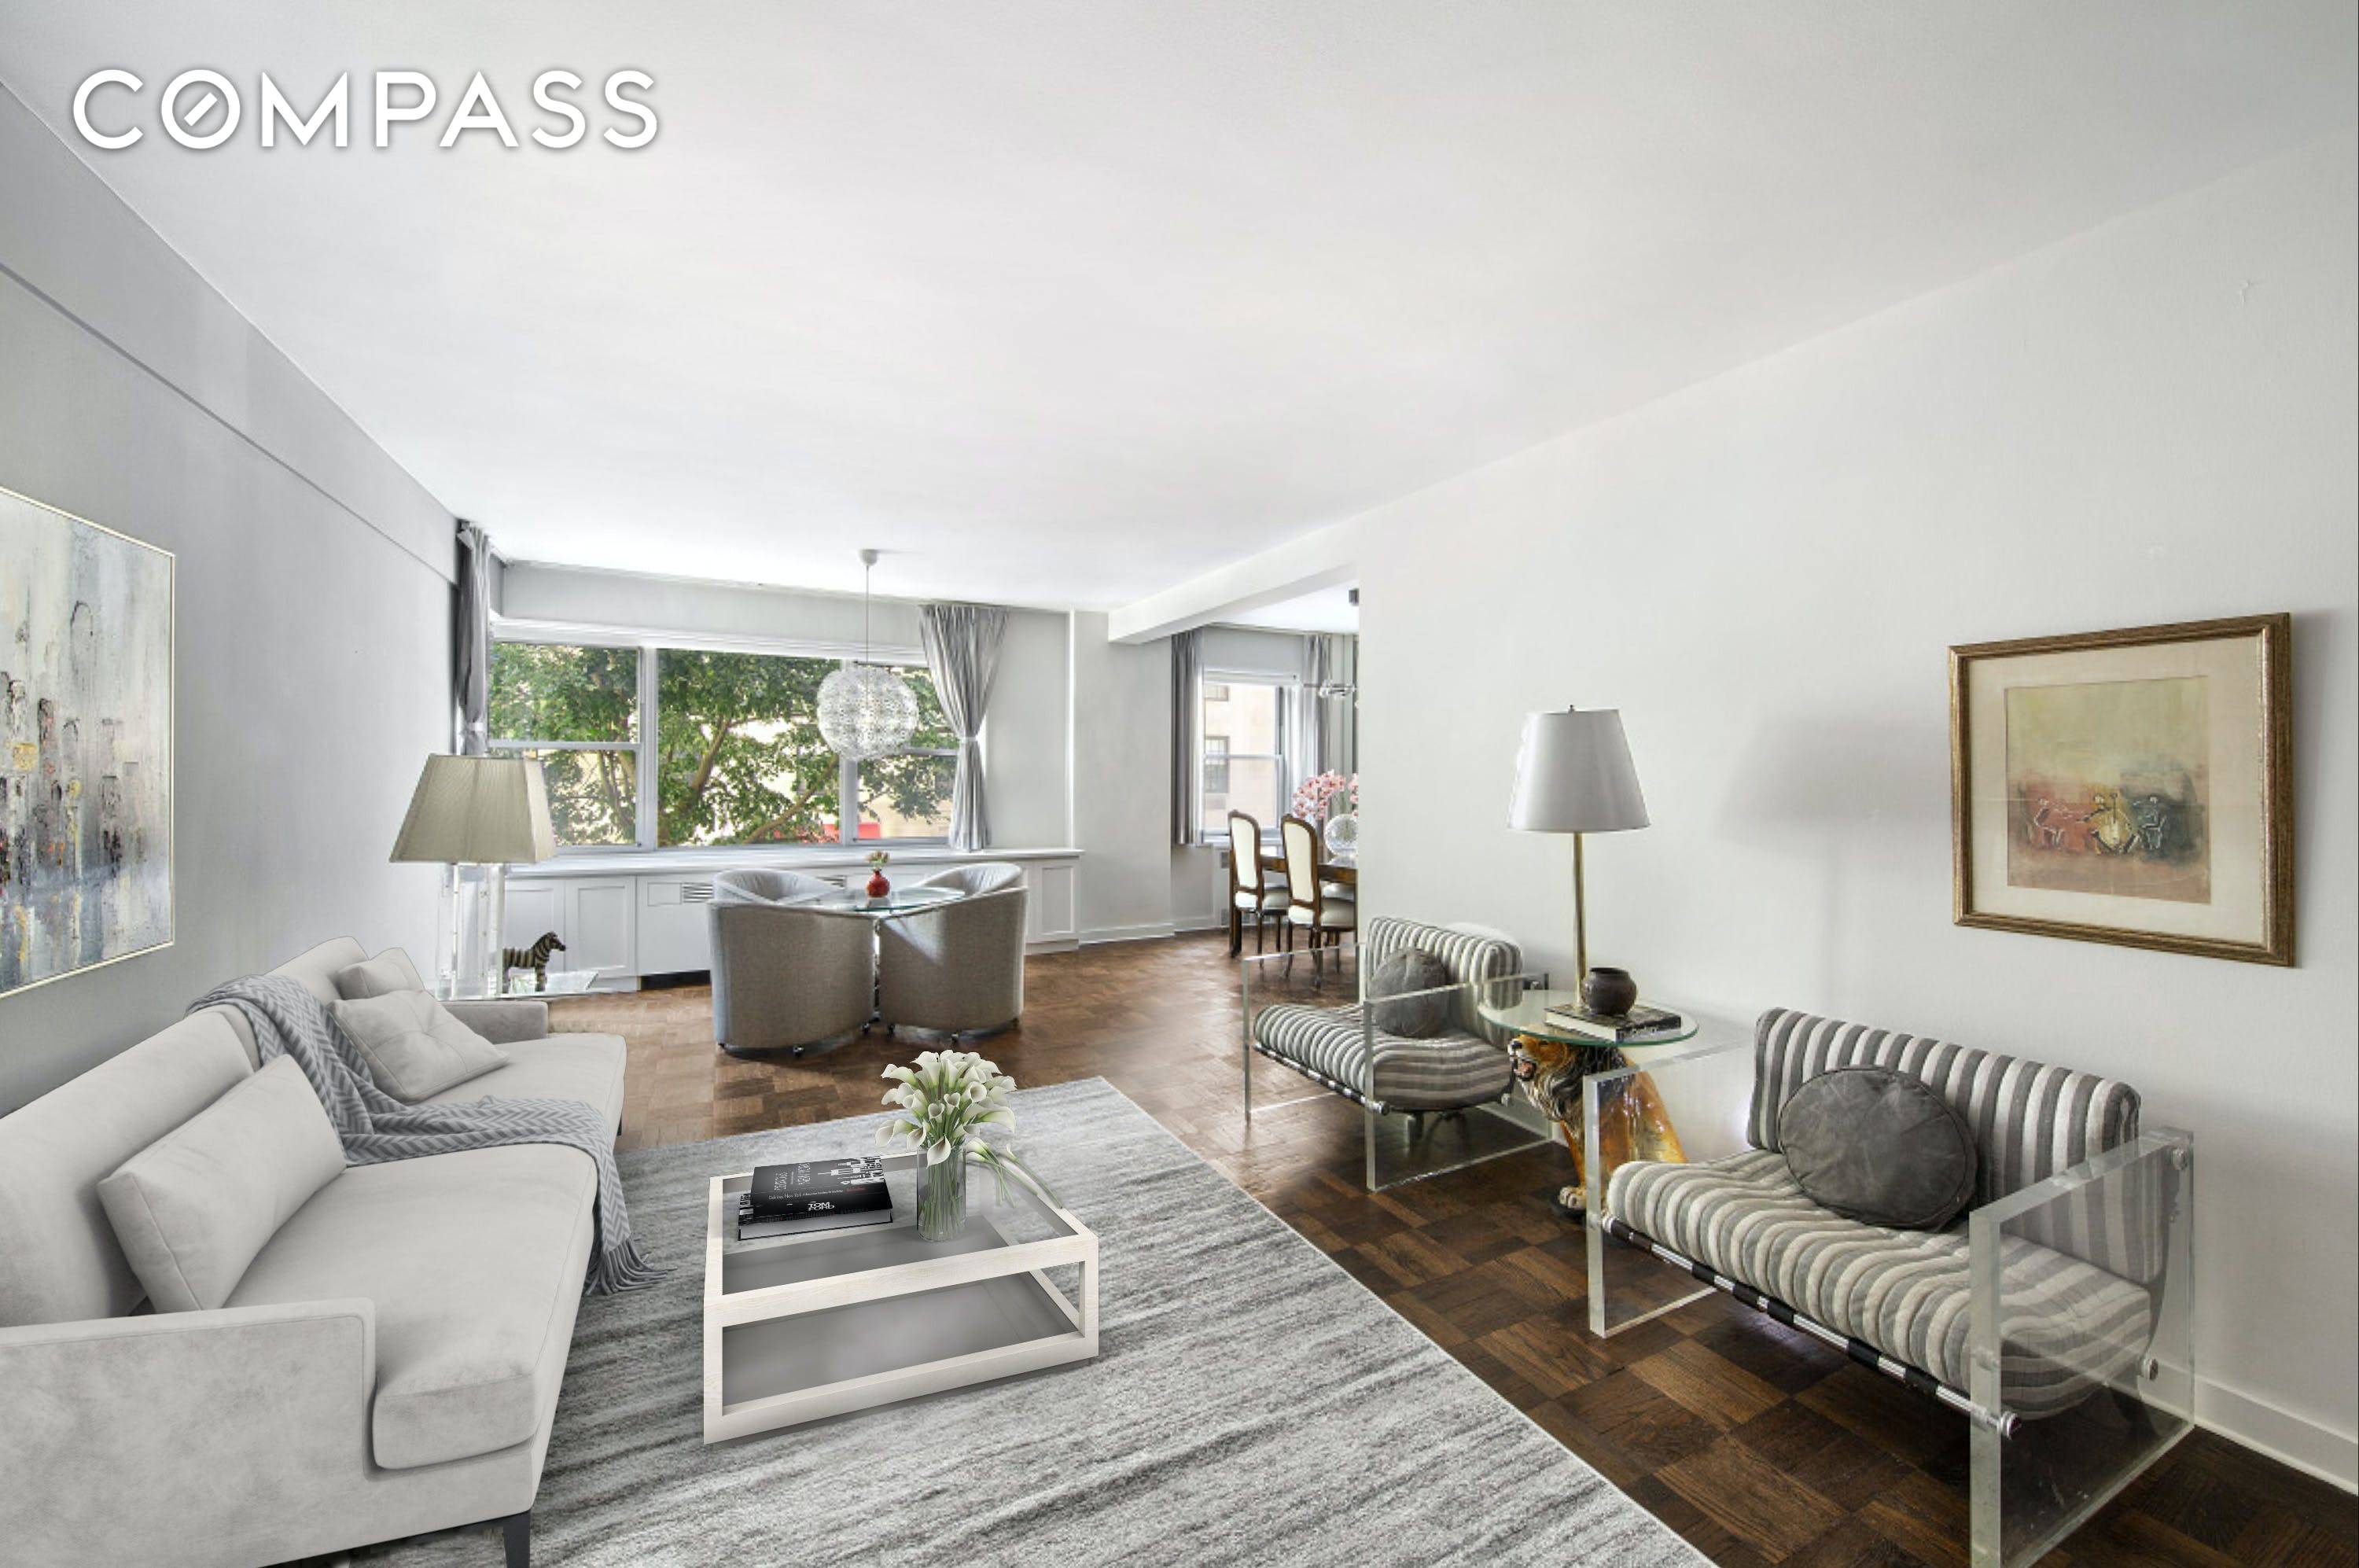 This beautifully renovated expansive 1 bedroom, 1 bathroom home with charming treetop views is now available in one of lower Fifth Avenue s most coveted buildings, The Brevoort.